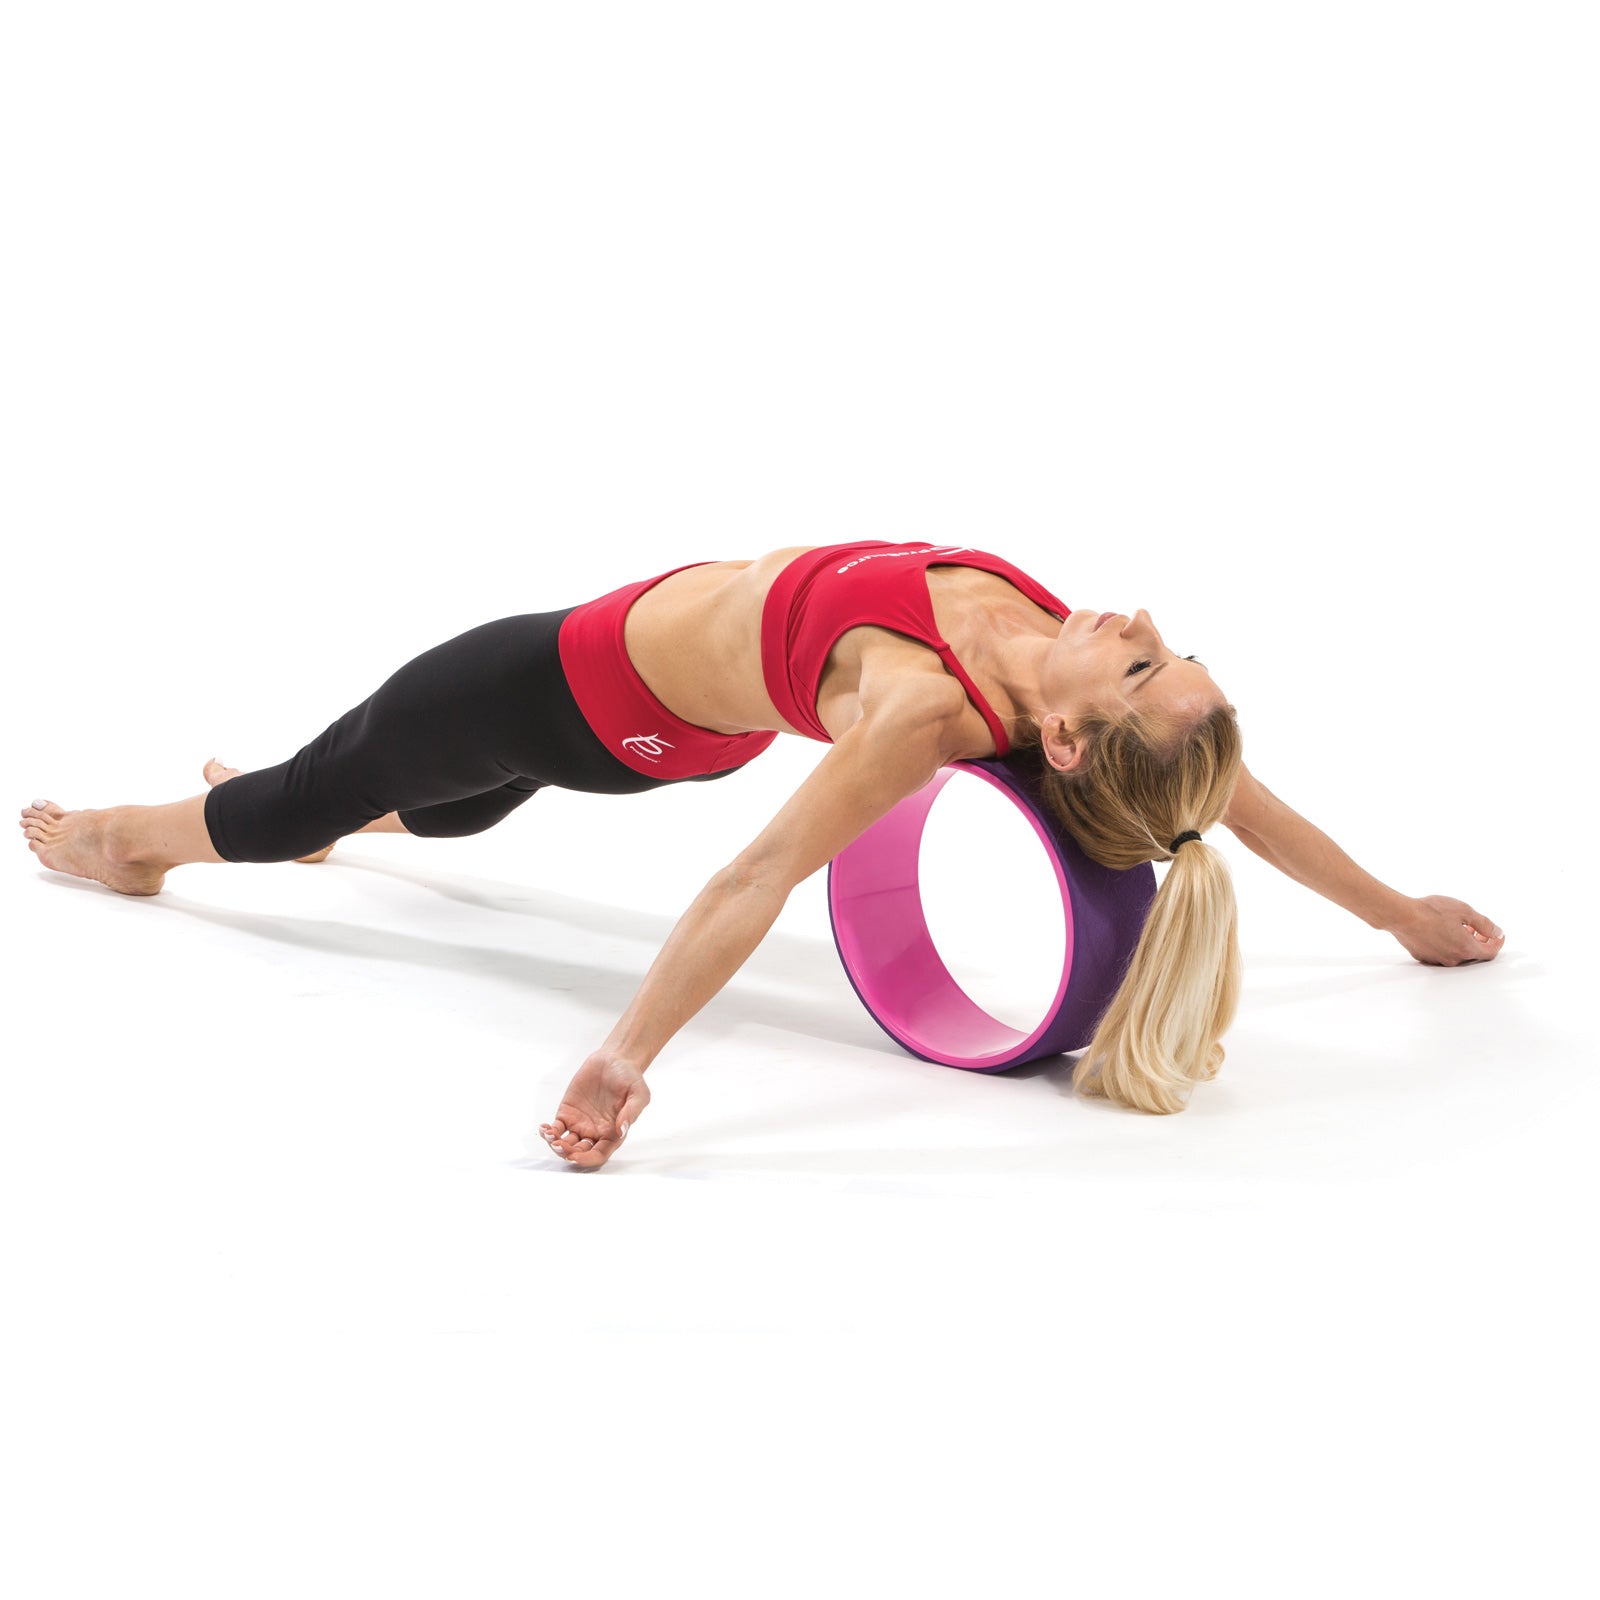 How to Use a Yoga Wheel for Stretching